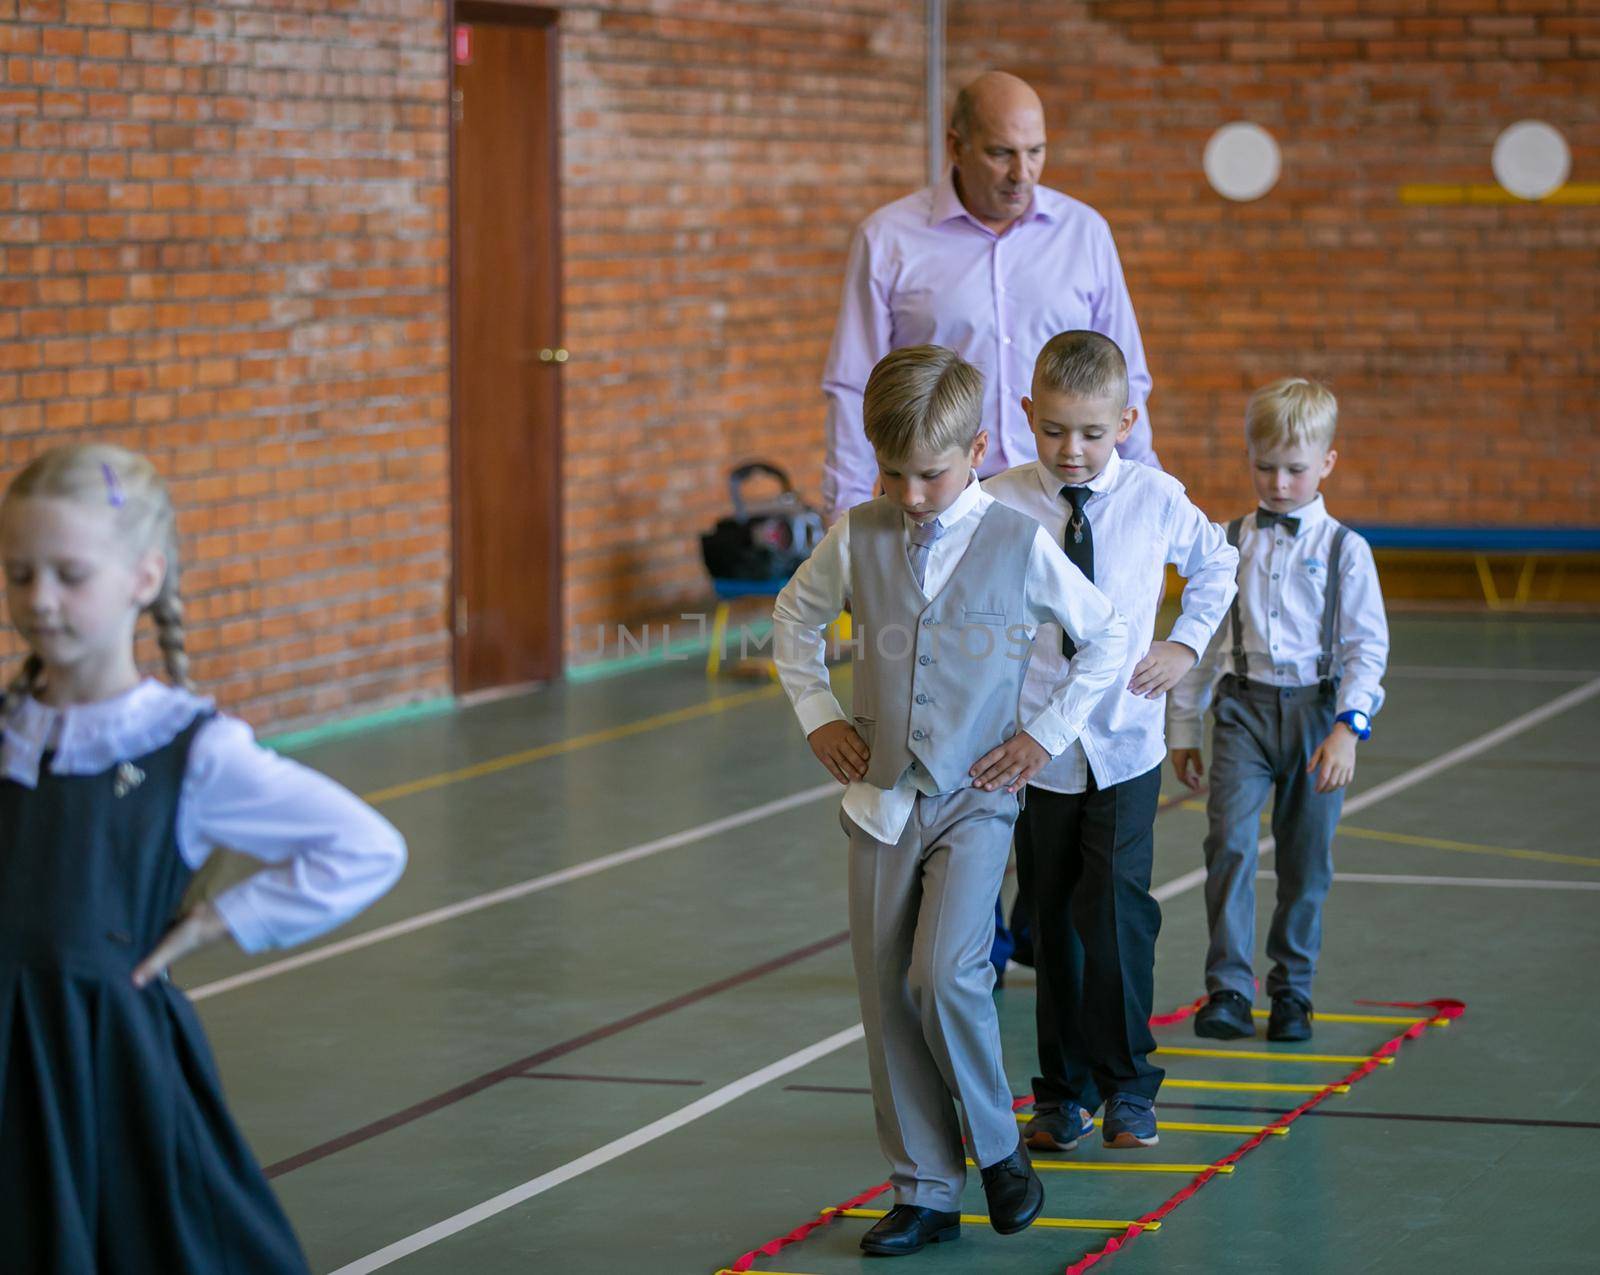 First graders in their first physical education class at the gym. Moscow, Russia, September 2, 2019 by Yurich32